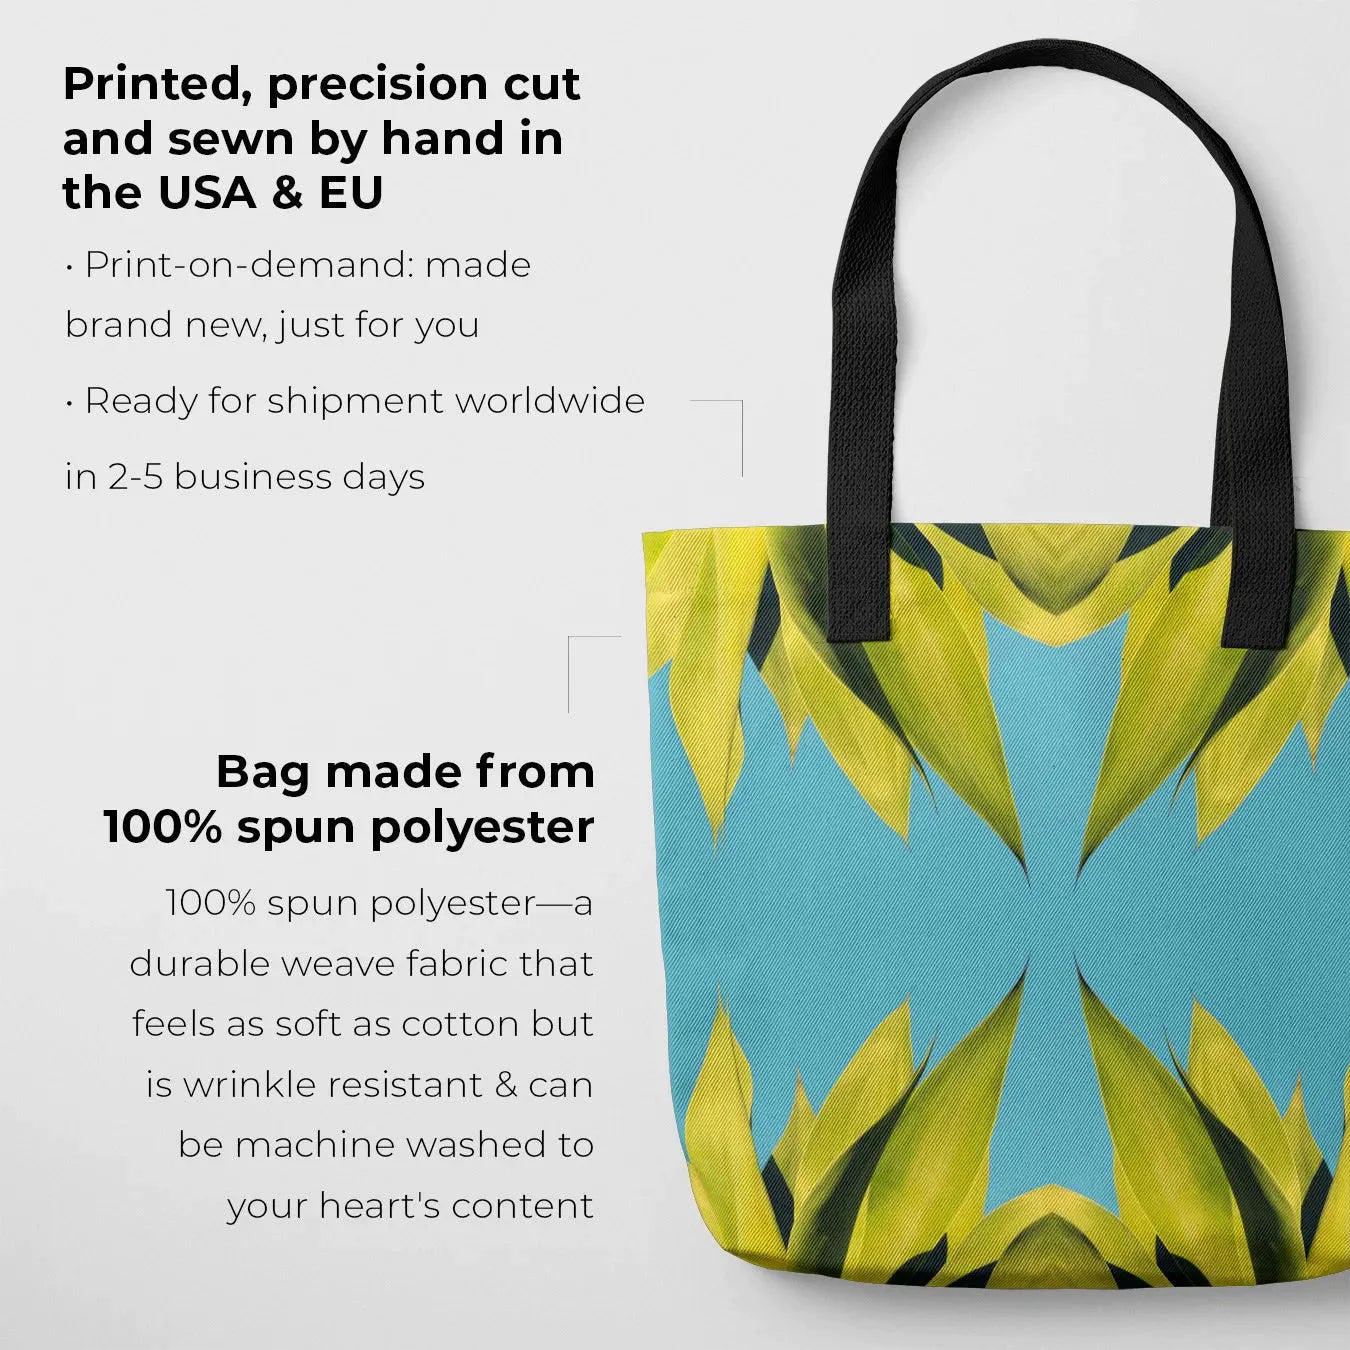 In Bloom / Bloom In Tote - Heavy Duty Reusable Grocery Bag - Yellow Handles - Shopping Totes - Aesthetic Art